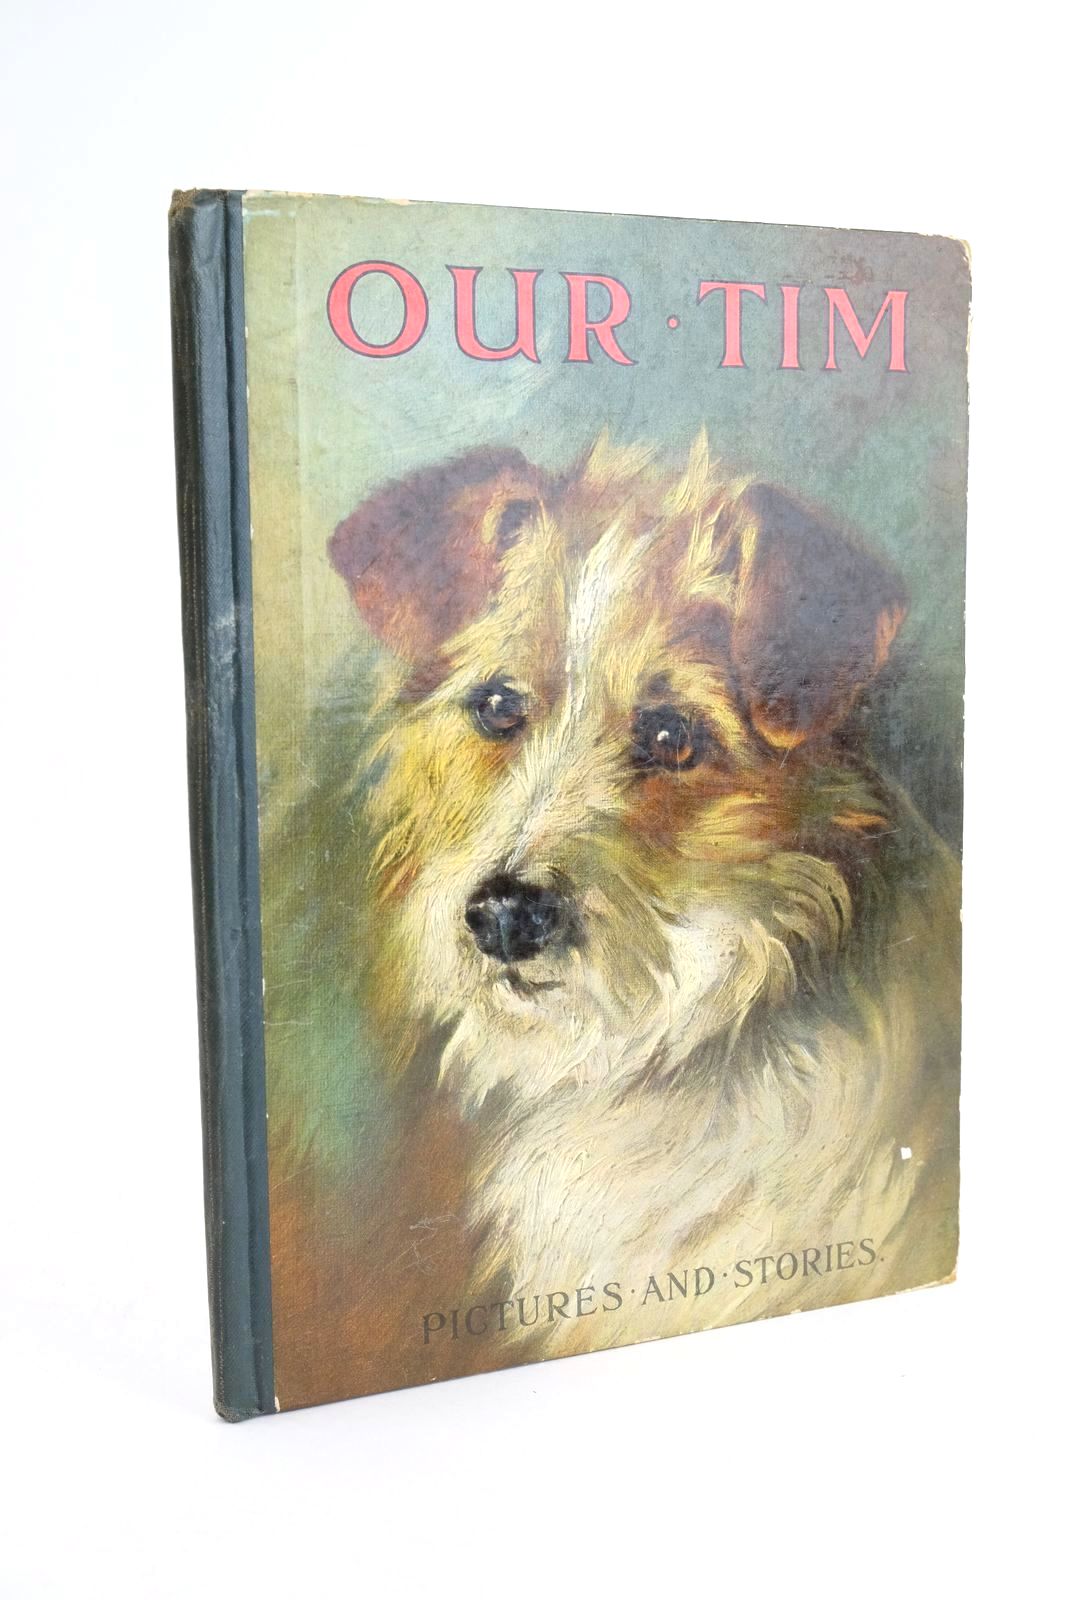 Photo of OUR TIM PICTURES &amp; STORIES written by Carter, Edith E. Westell, W. Percival et al, published by Ward, Lock &amp; Co. Ltd. (STOCK CODE: 1323683)  for sale by Stella & Rose's Books